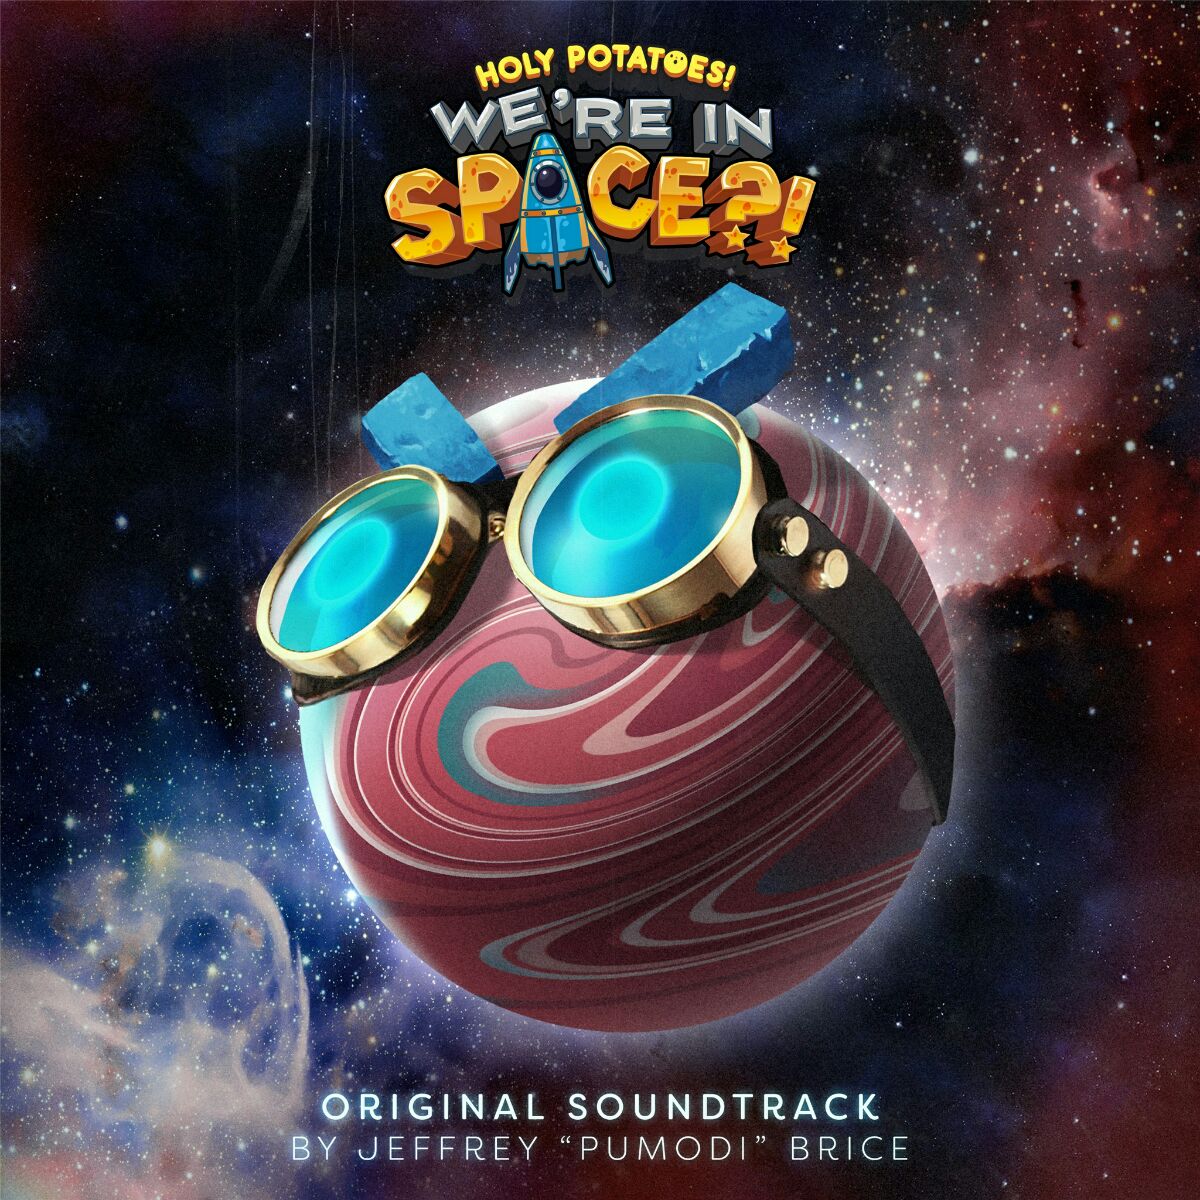 Holy Potatoes! We’re in Space?! Soundtrack screenshot